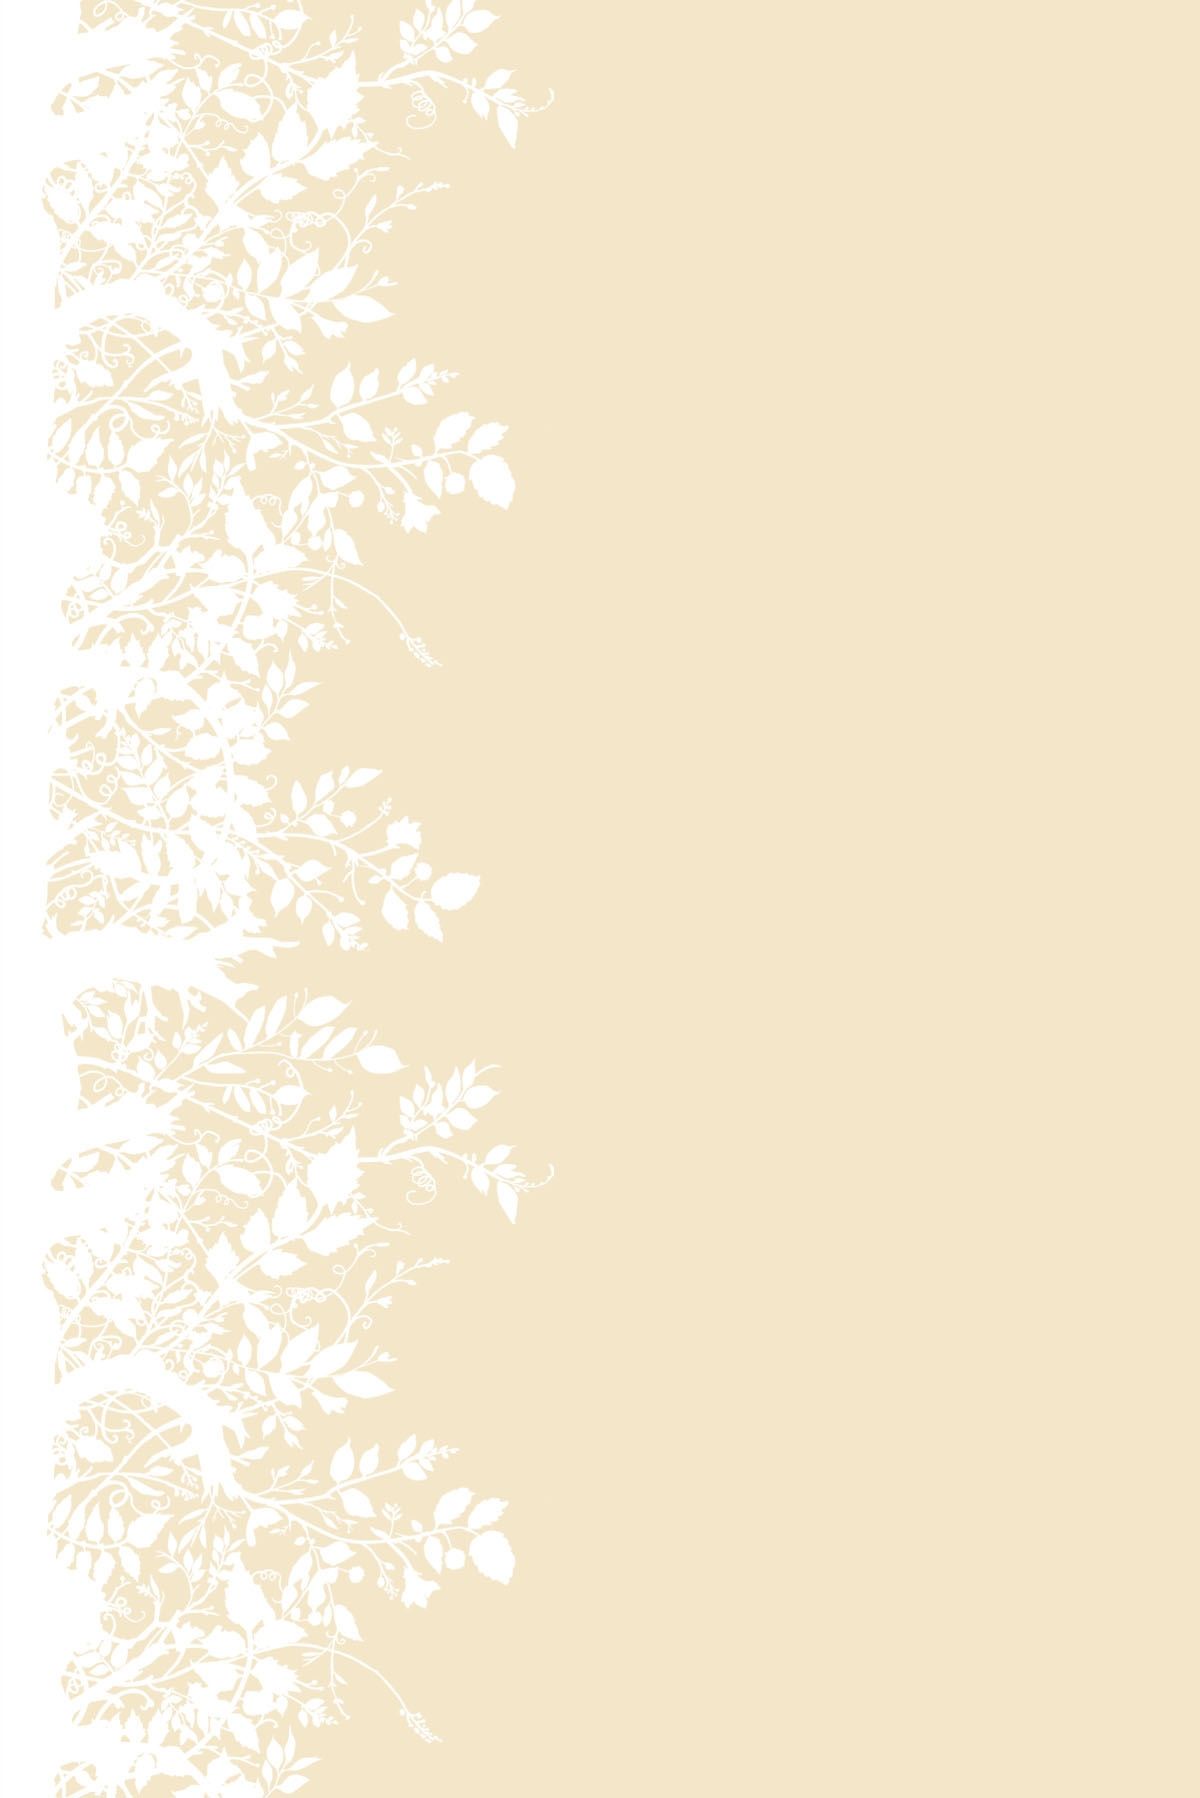 Cotton Silk Fabric Wallpaper Texture Pattern Background In Light Pastel  Beige Cream Color Tone Stock Photo  Download Image Now  iStock